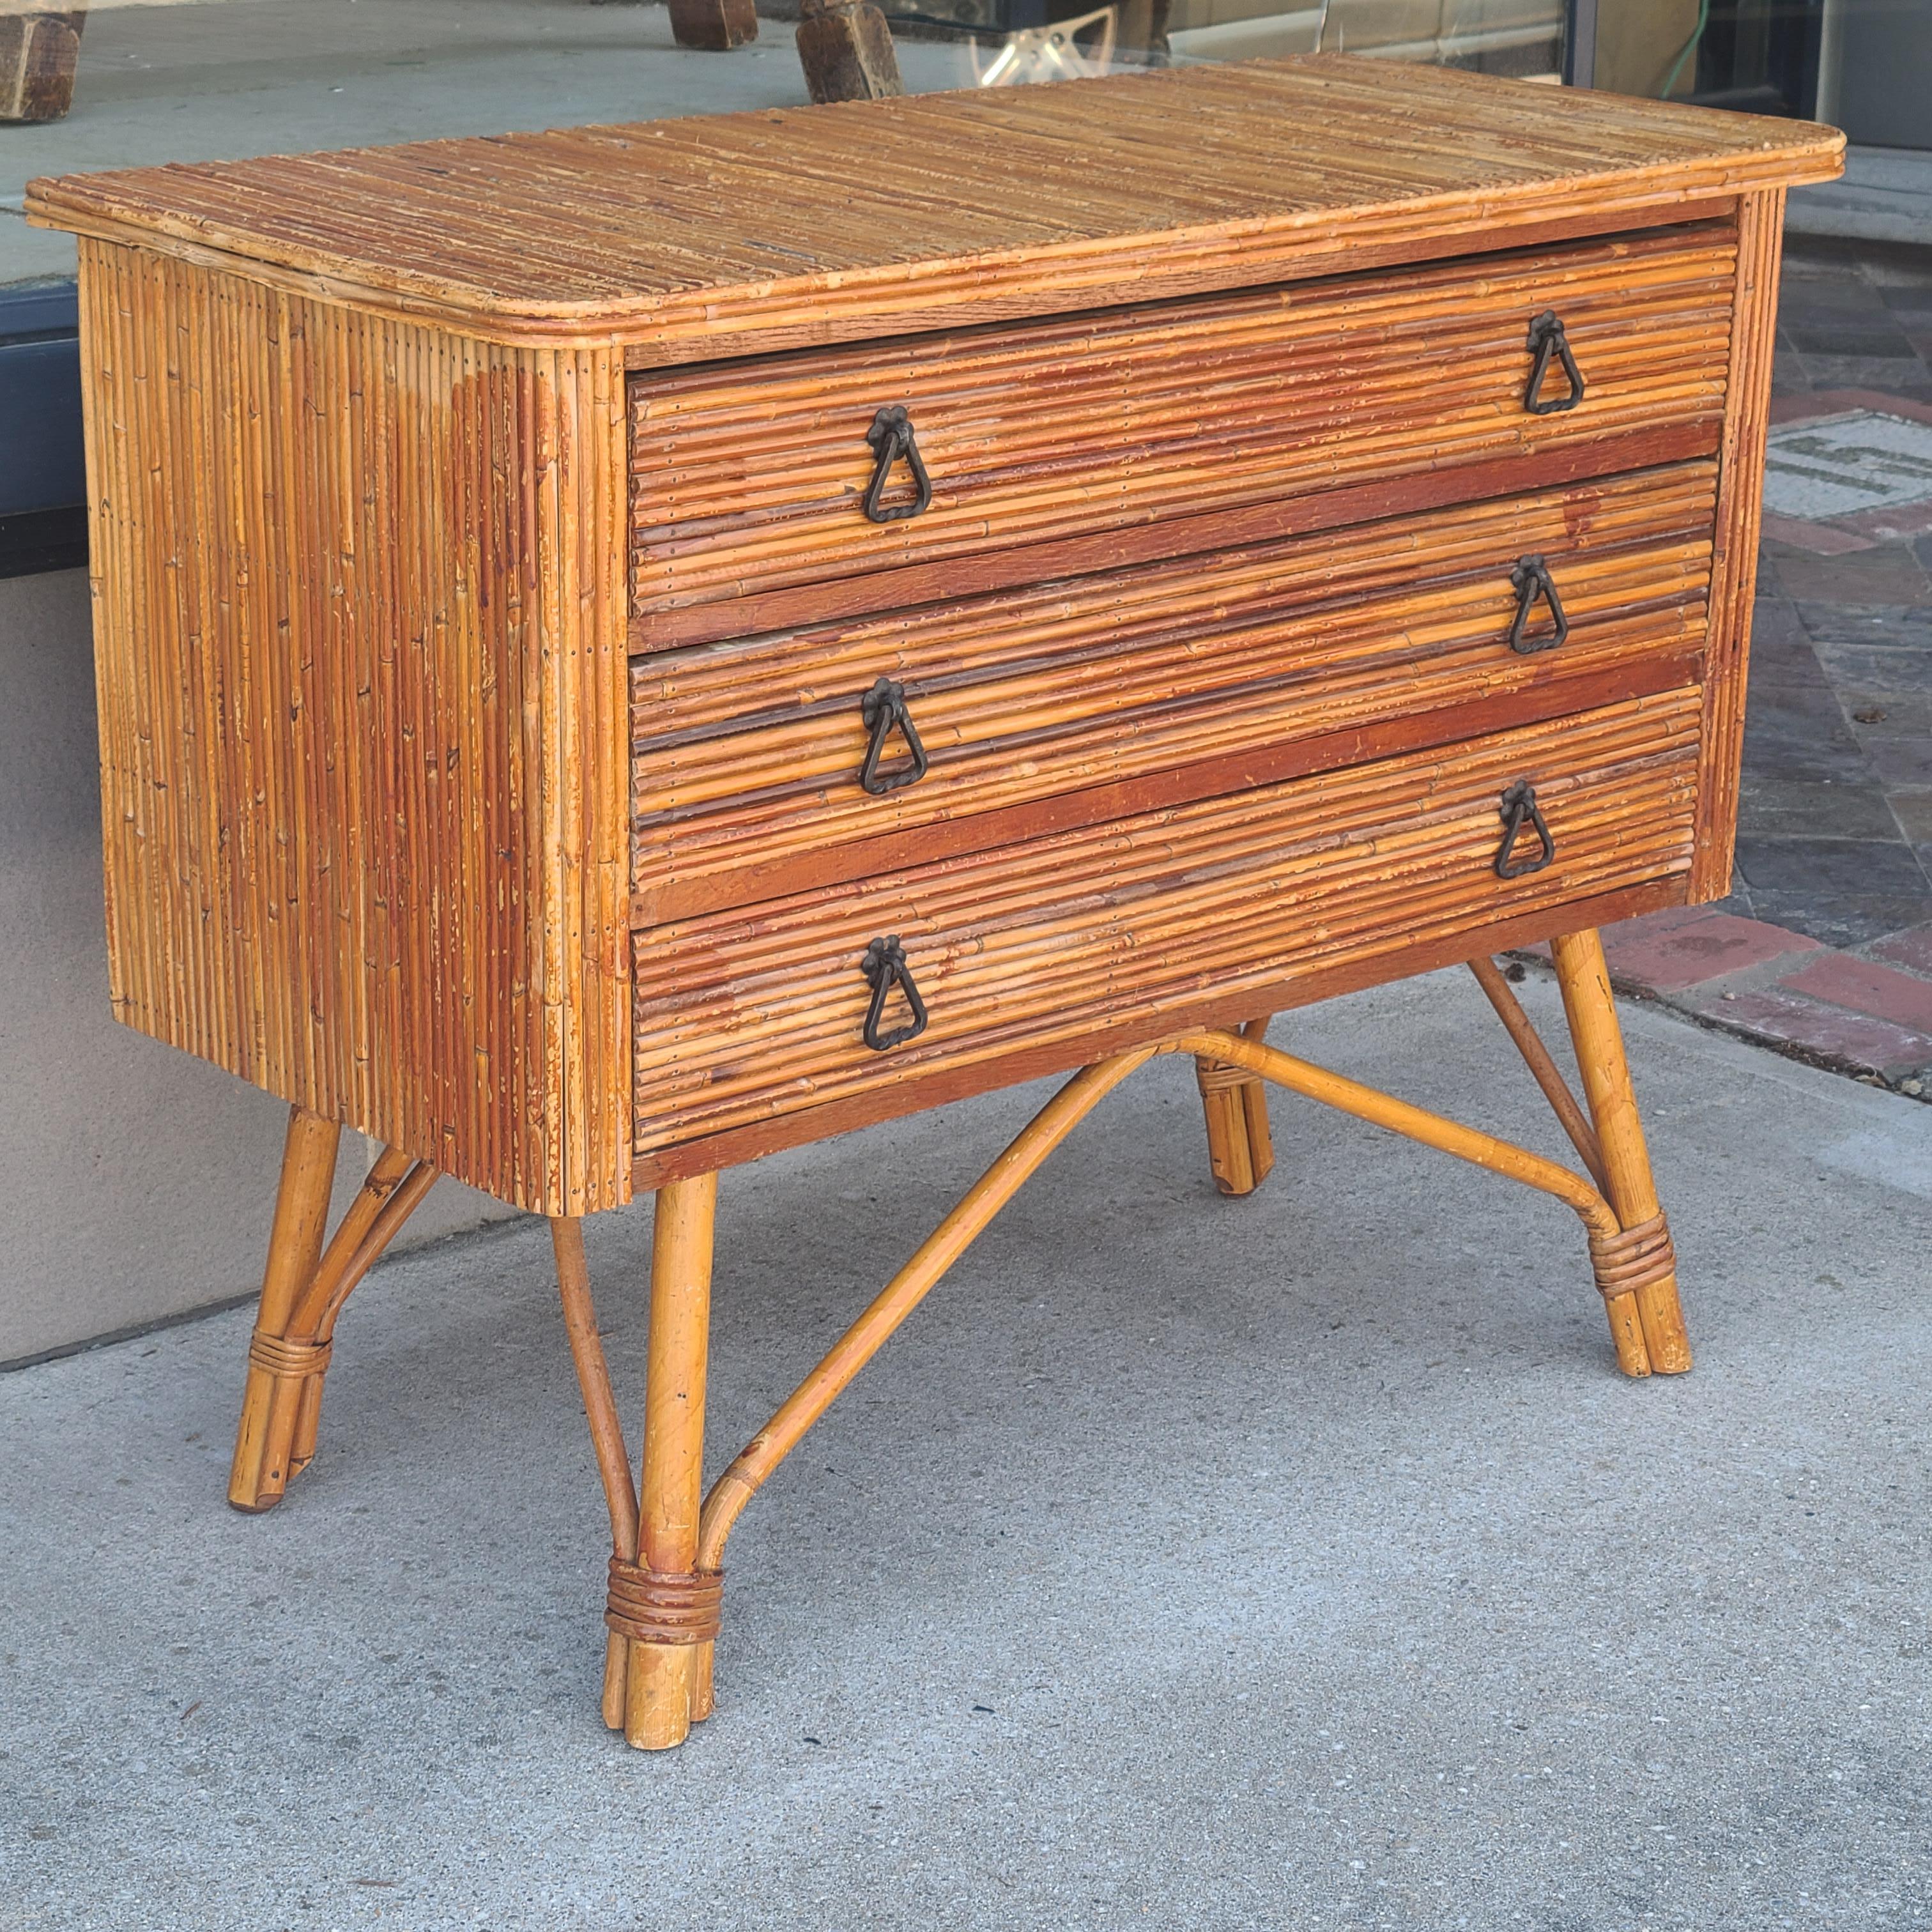 Pencil Reed French Dresser Attributed to Adrien Audoux & Frida Minet 1